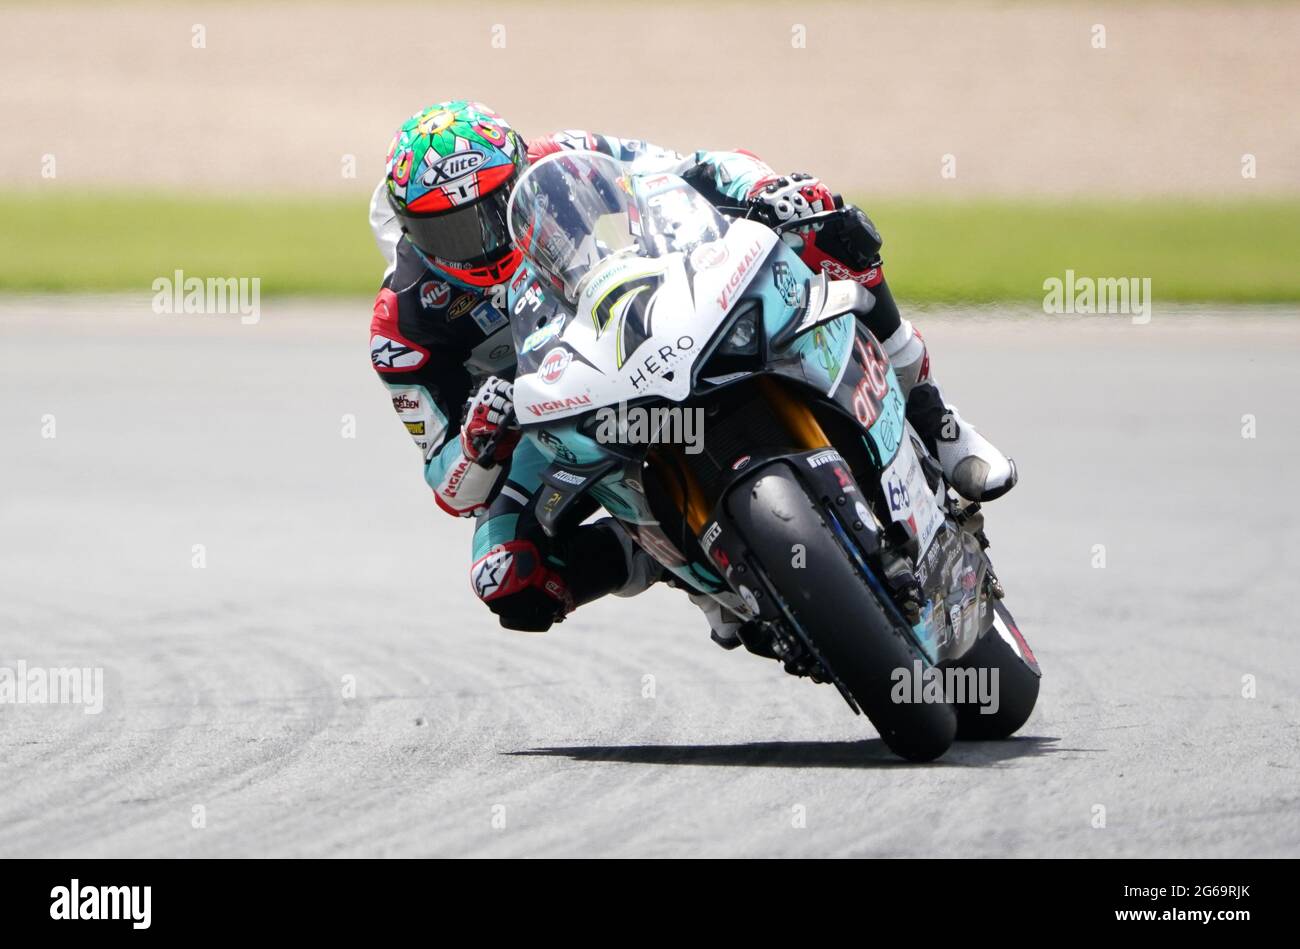 Chaz Davies of Team GoEleven in Race 2 during day two of the Motul Fim Superbike Championship 2021 at Donington Park, Leicestershire. Saturday July 4, 2021. Stock Photo